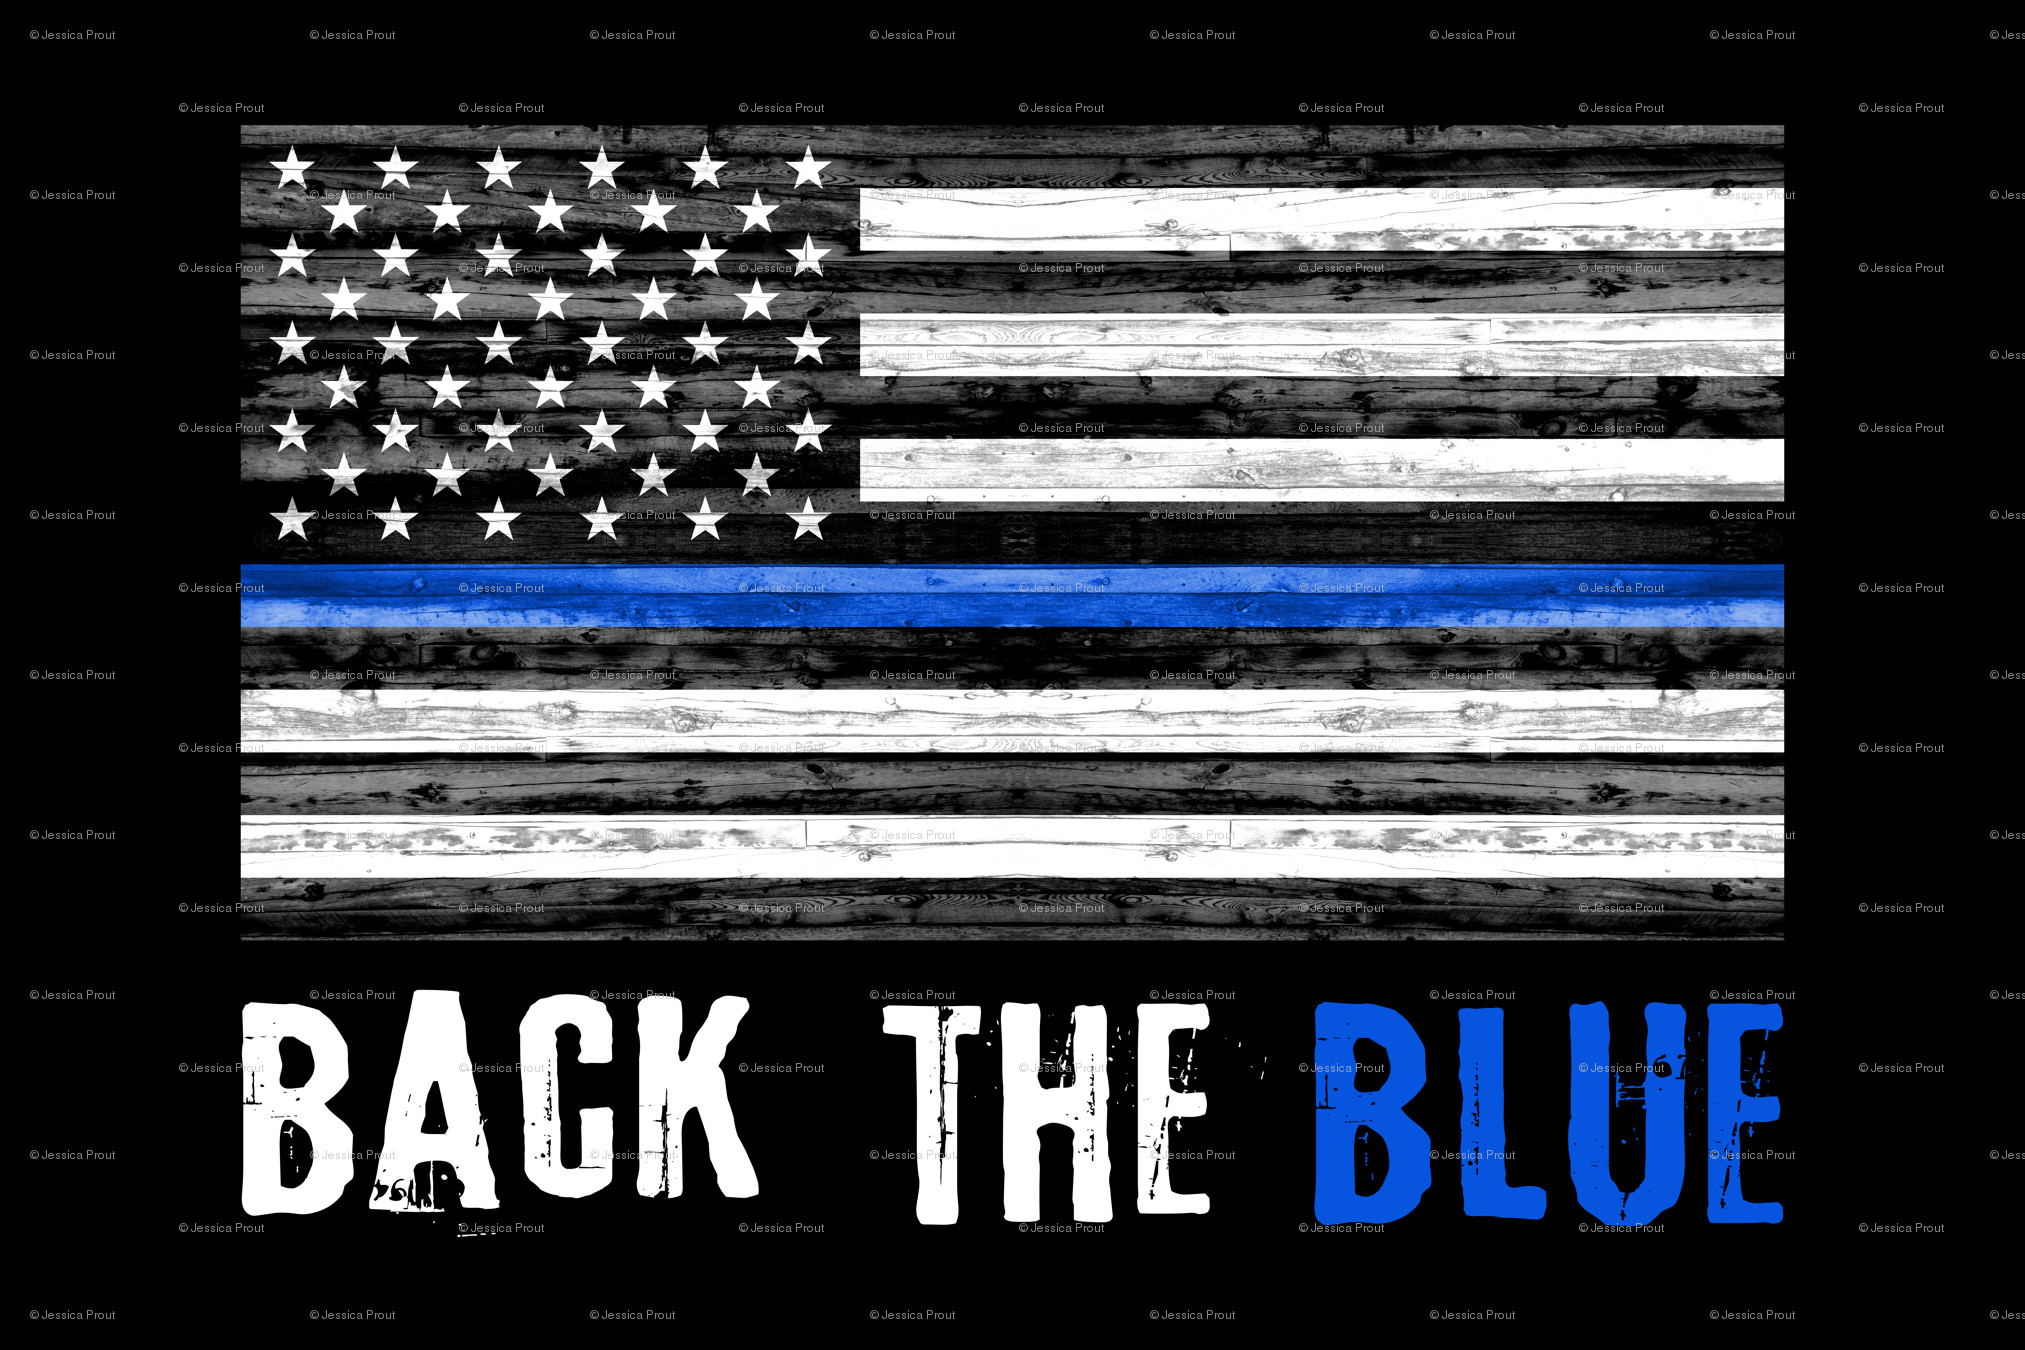 Thin Blue Line Wallpaper (67+ images)